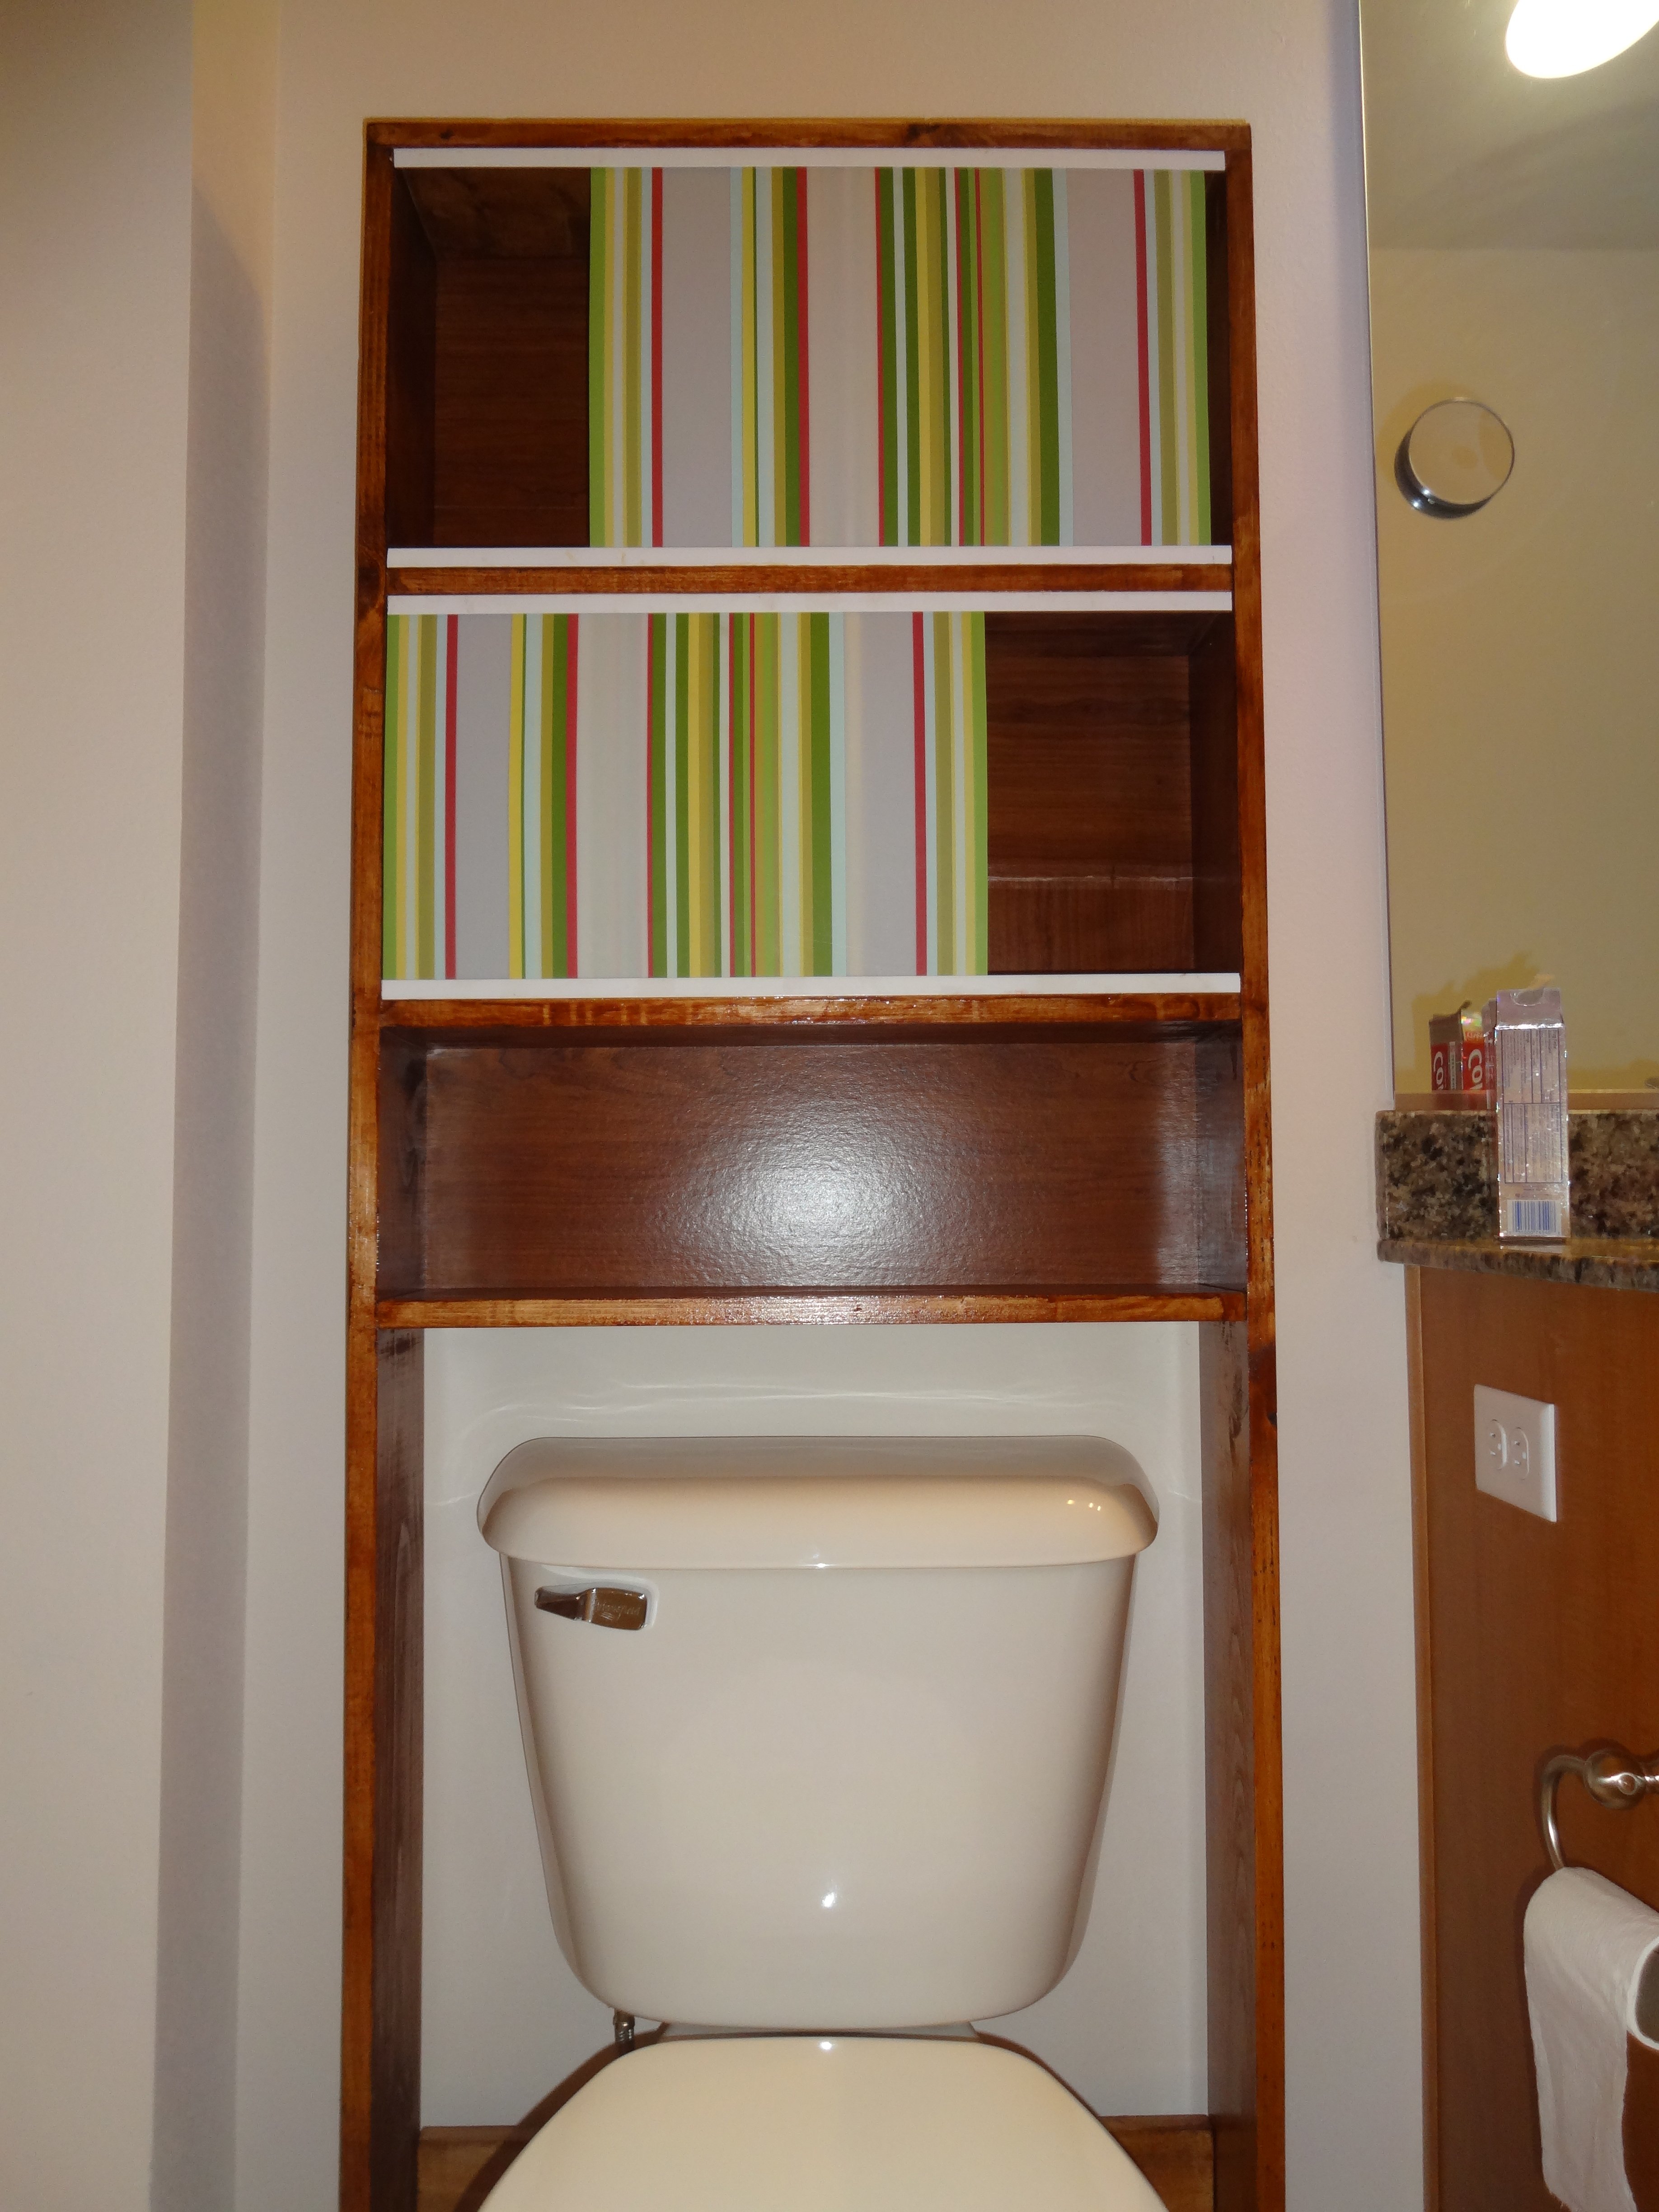 Ana White Over the toilet medicine / storage DIY Projects